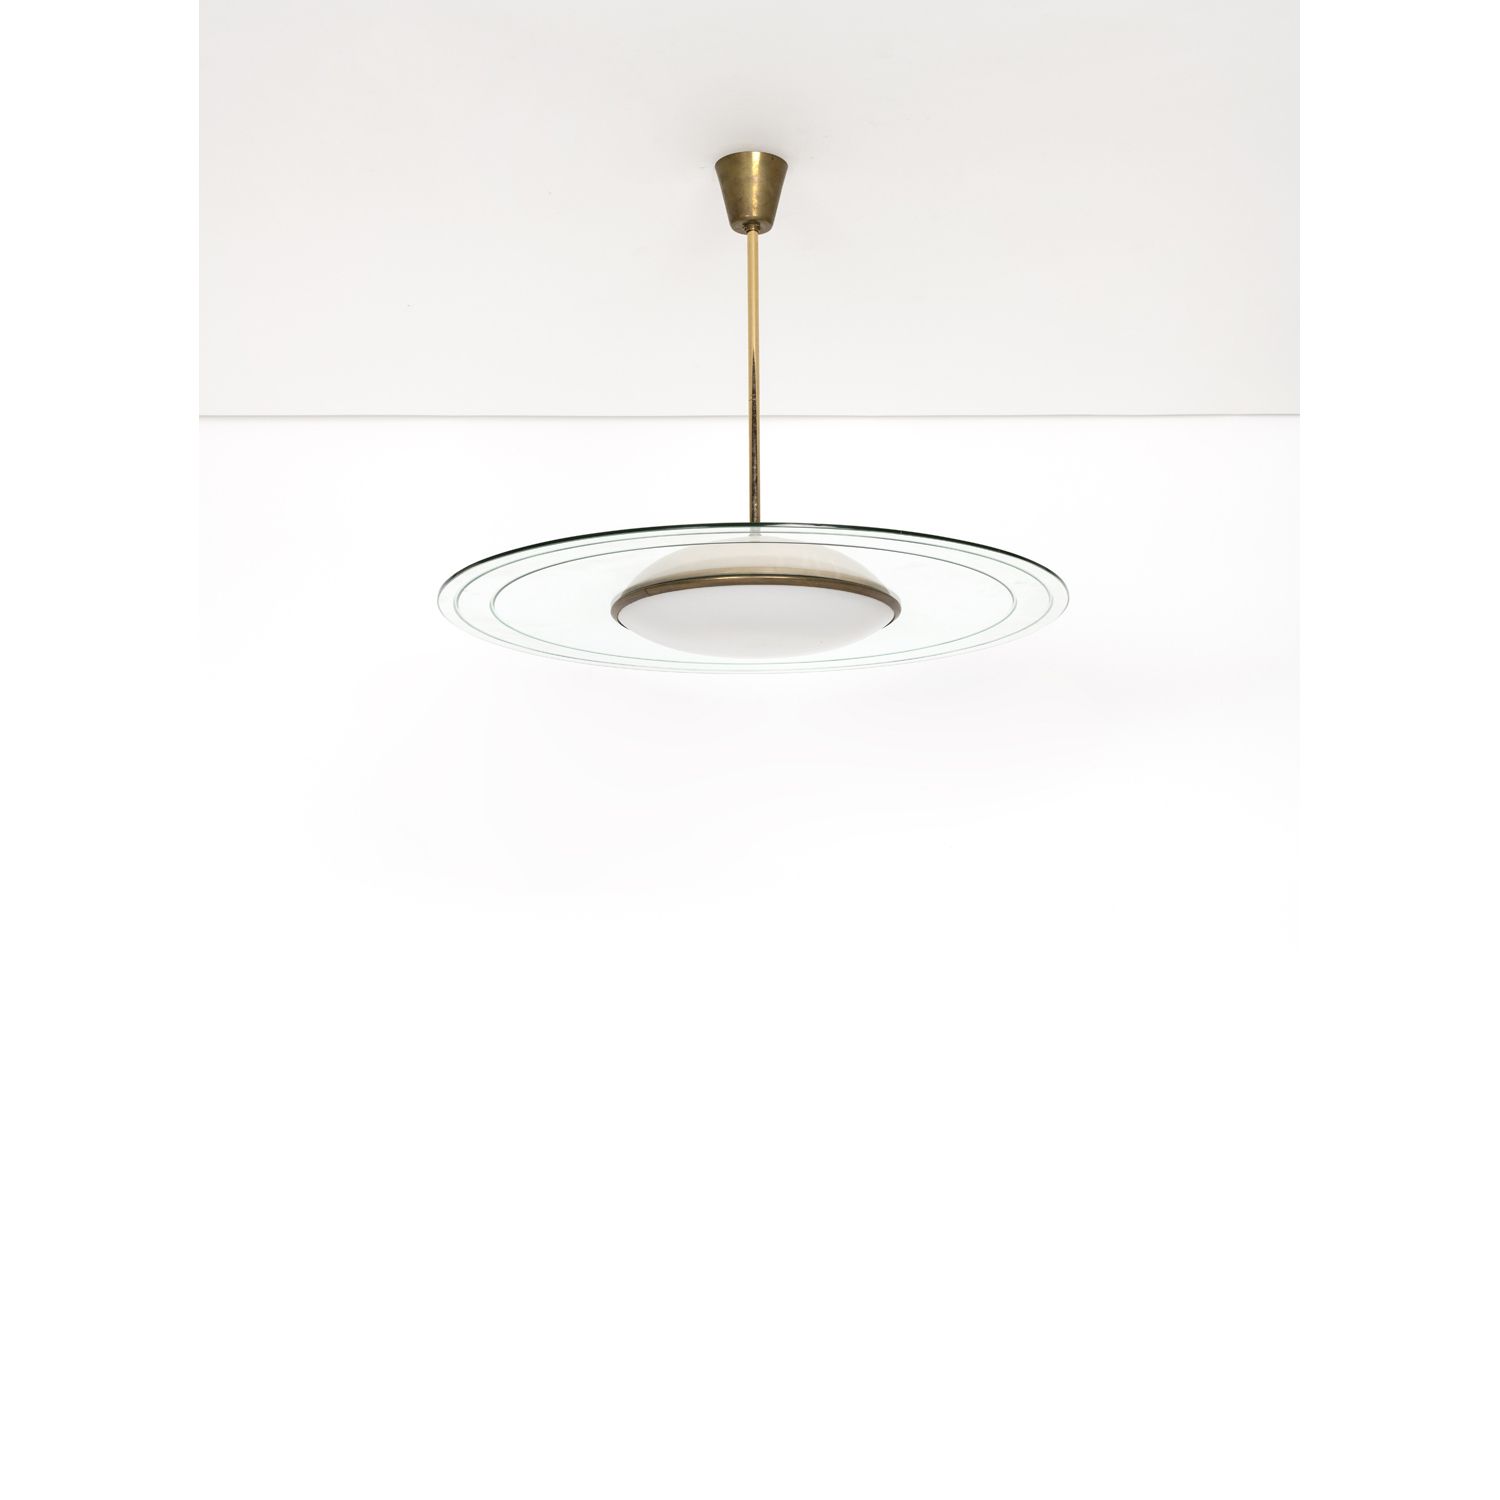 Null Gio Ponti (1891-1979)

Suspension

Brass, tinted glass, opaque glass and al&hellip;